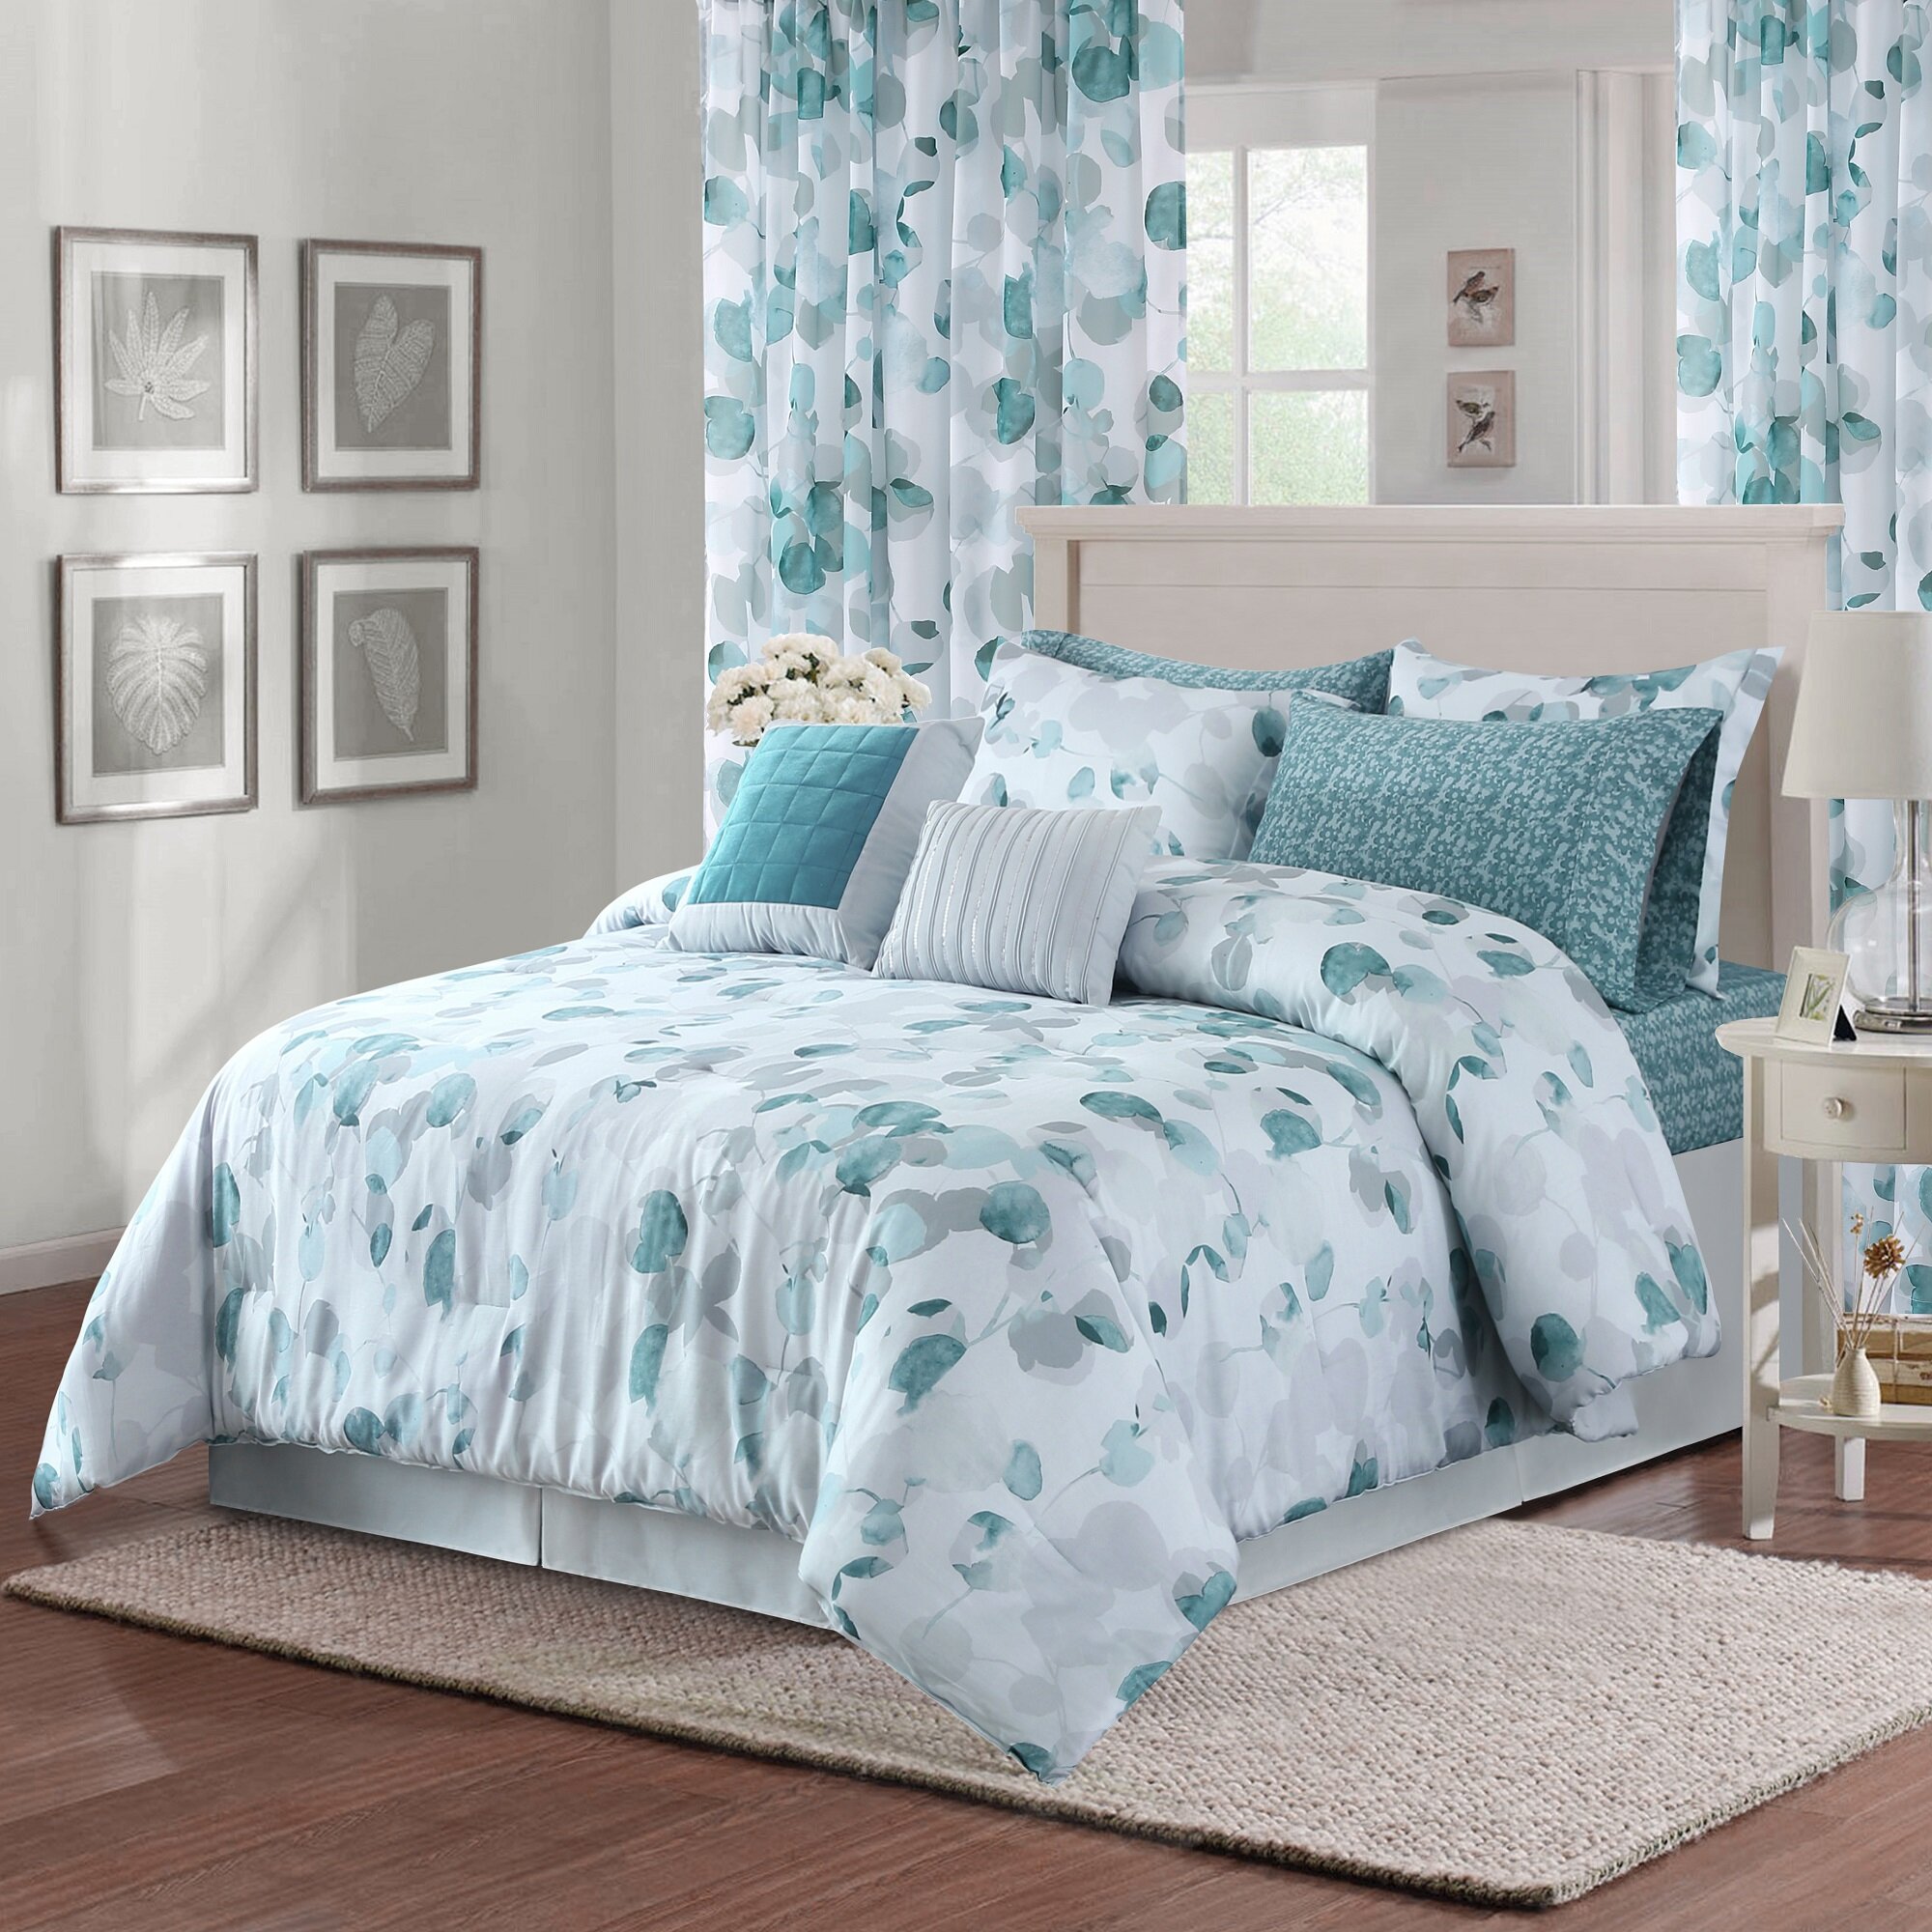 Teal Twin Comforters Sets You Ll Love In 2021 Wayfair